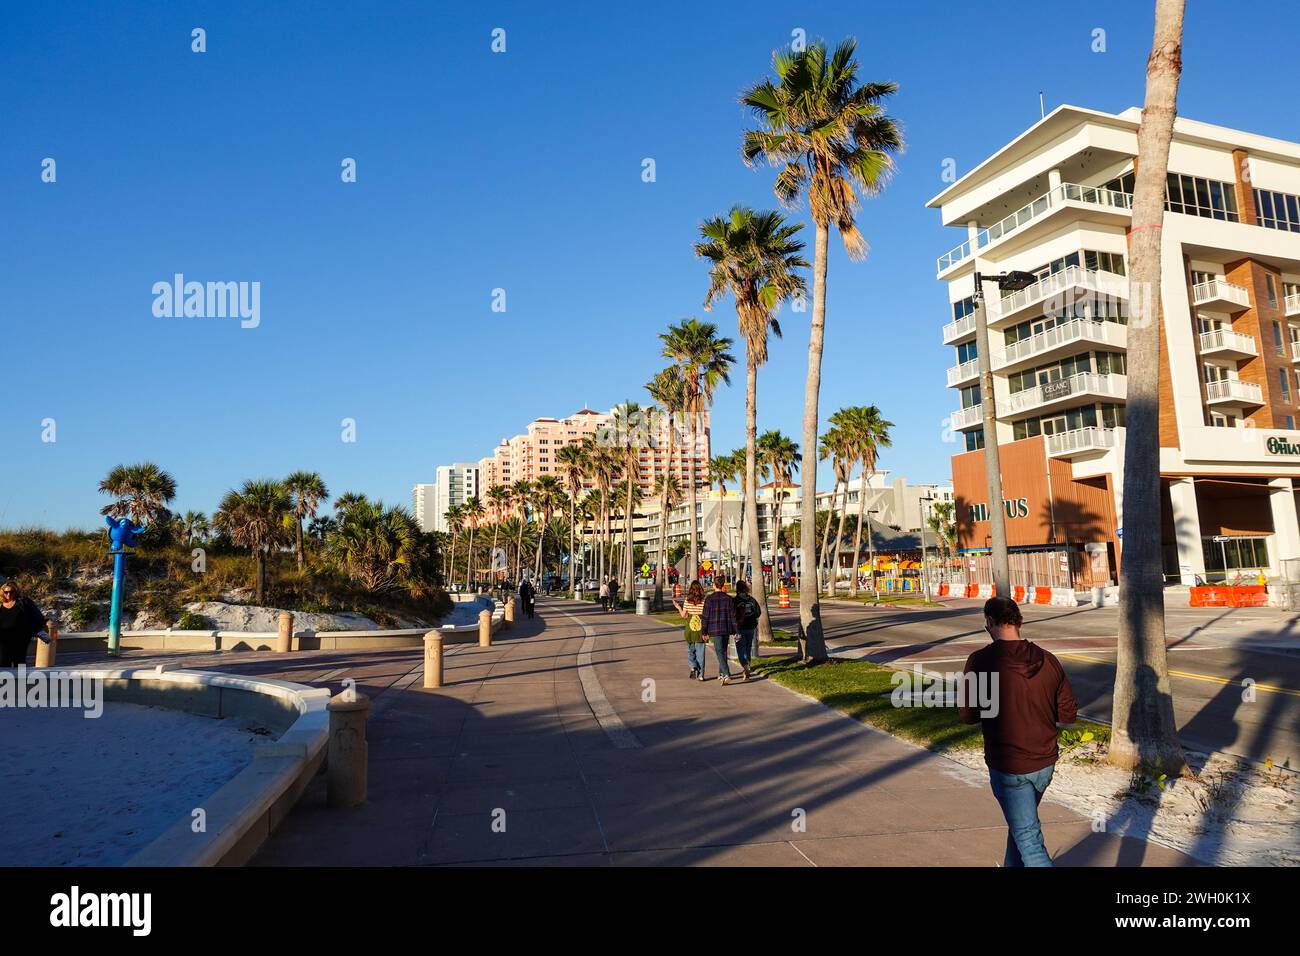 People on Mandalay Avenue at Clearwater, Florida, on a sunny day Stock Photo